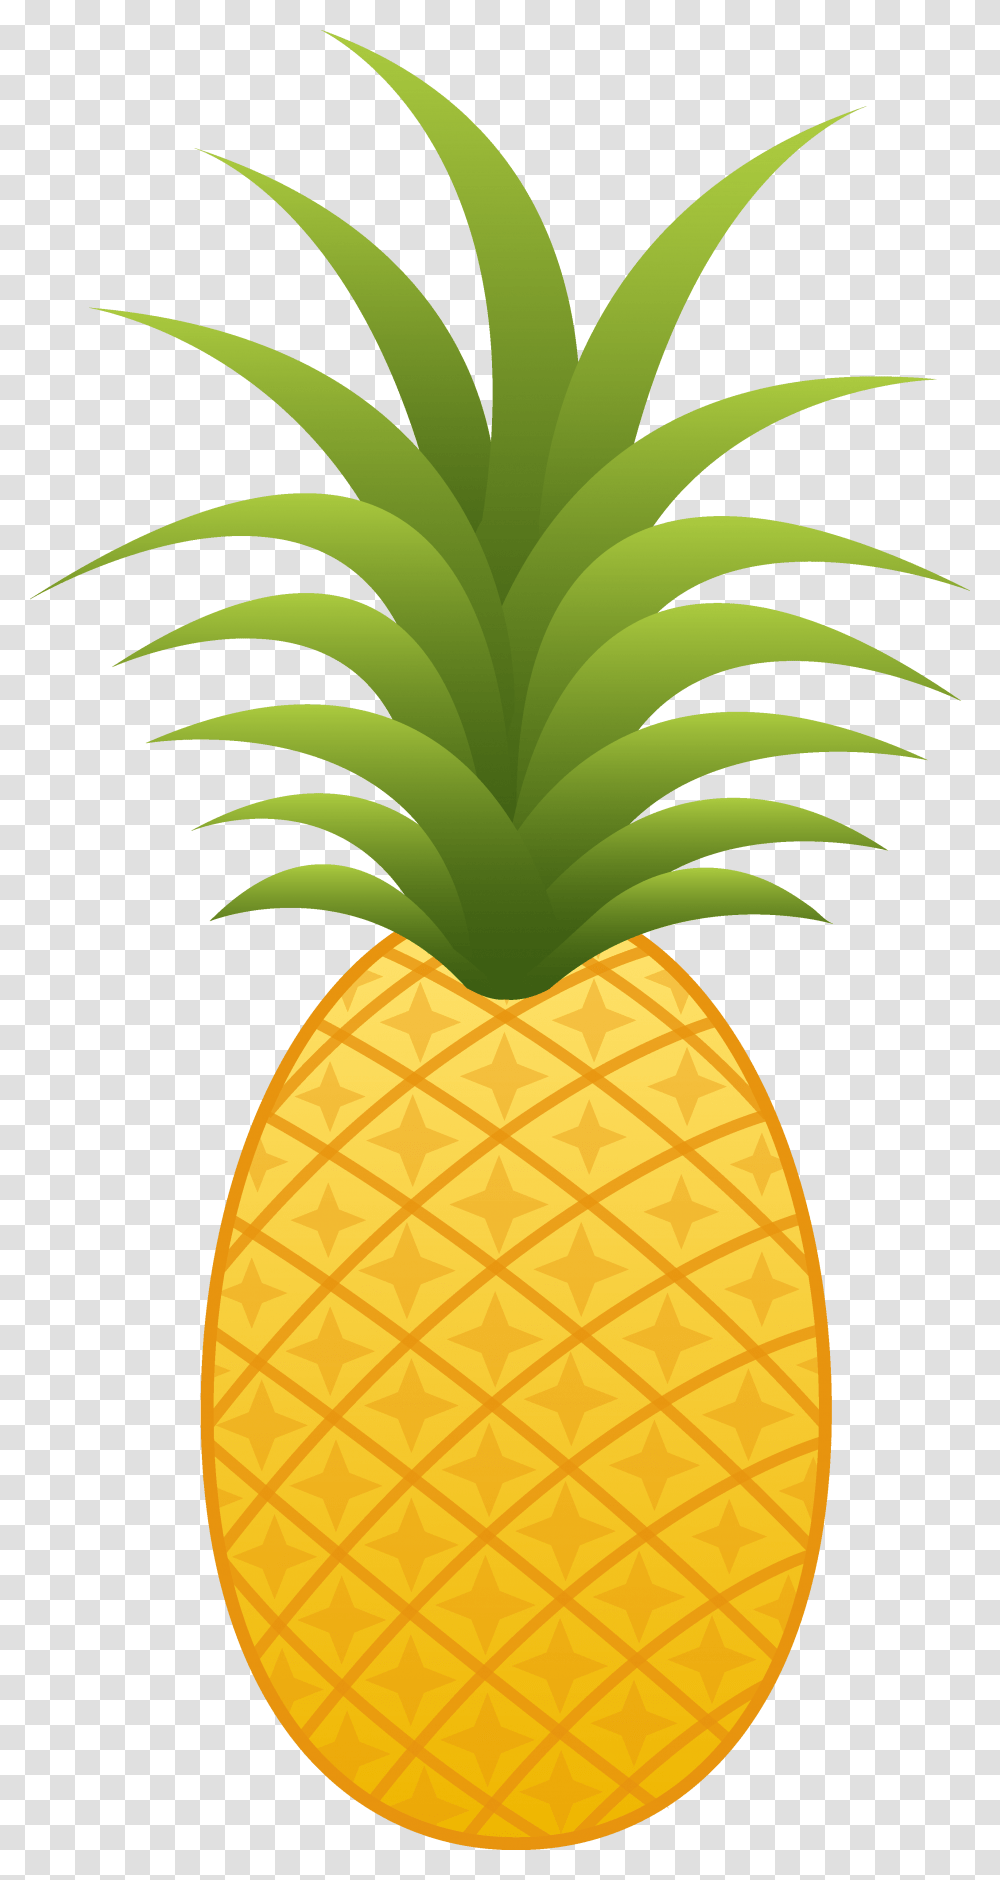 Pinapple Clipart Image Purepng Free Cc0 Pineapple Clipart Background, Plant, Fruit, Food Transparent Png